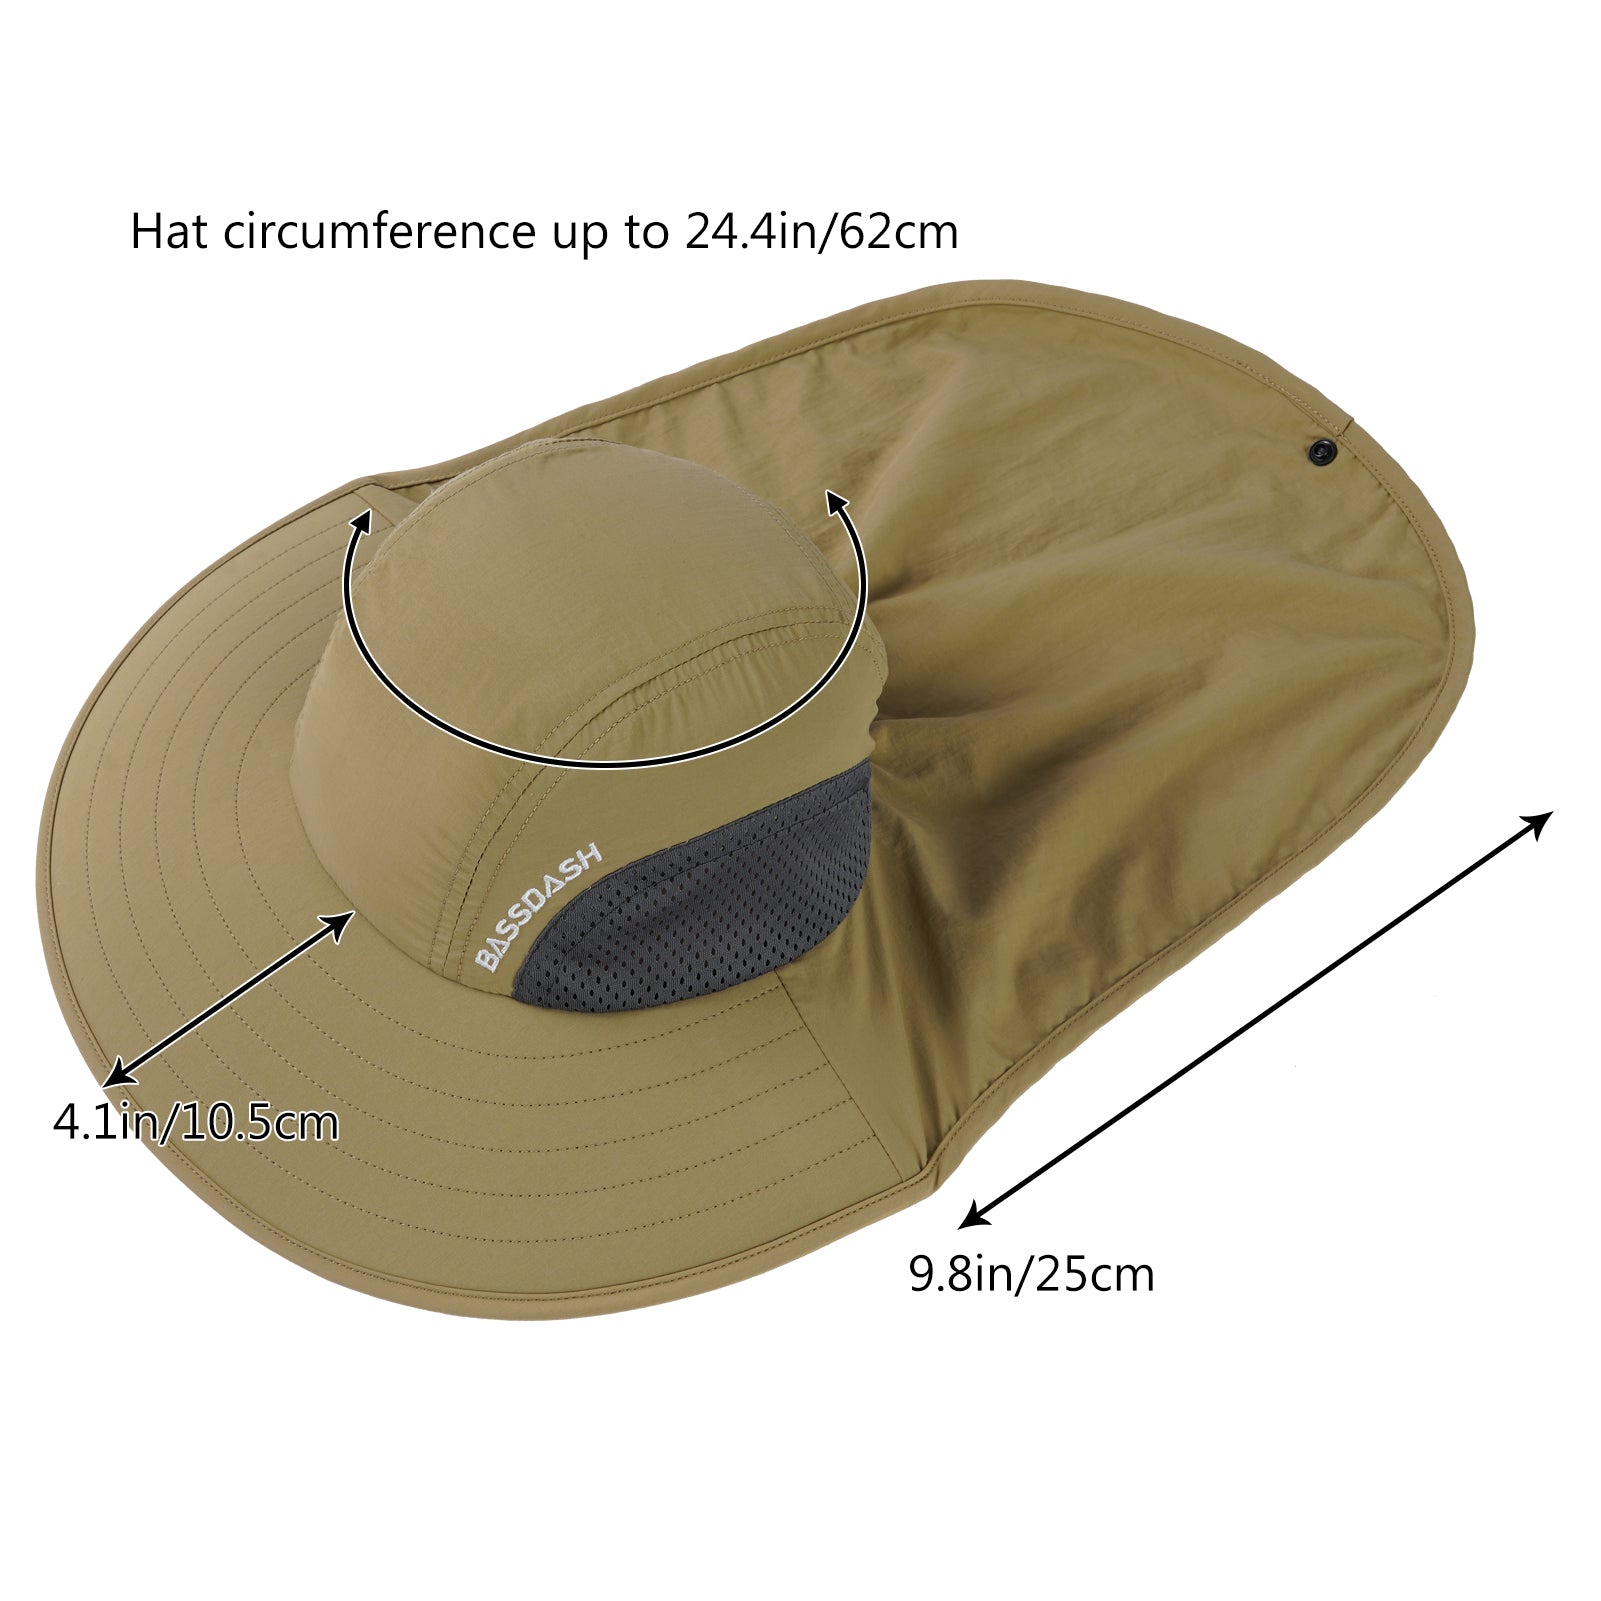 Large brim hat, crushable and waeterproof. With UPF 50 sun protection